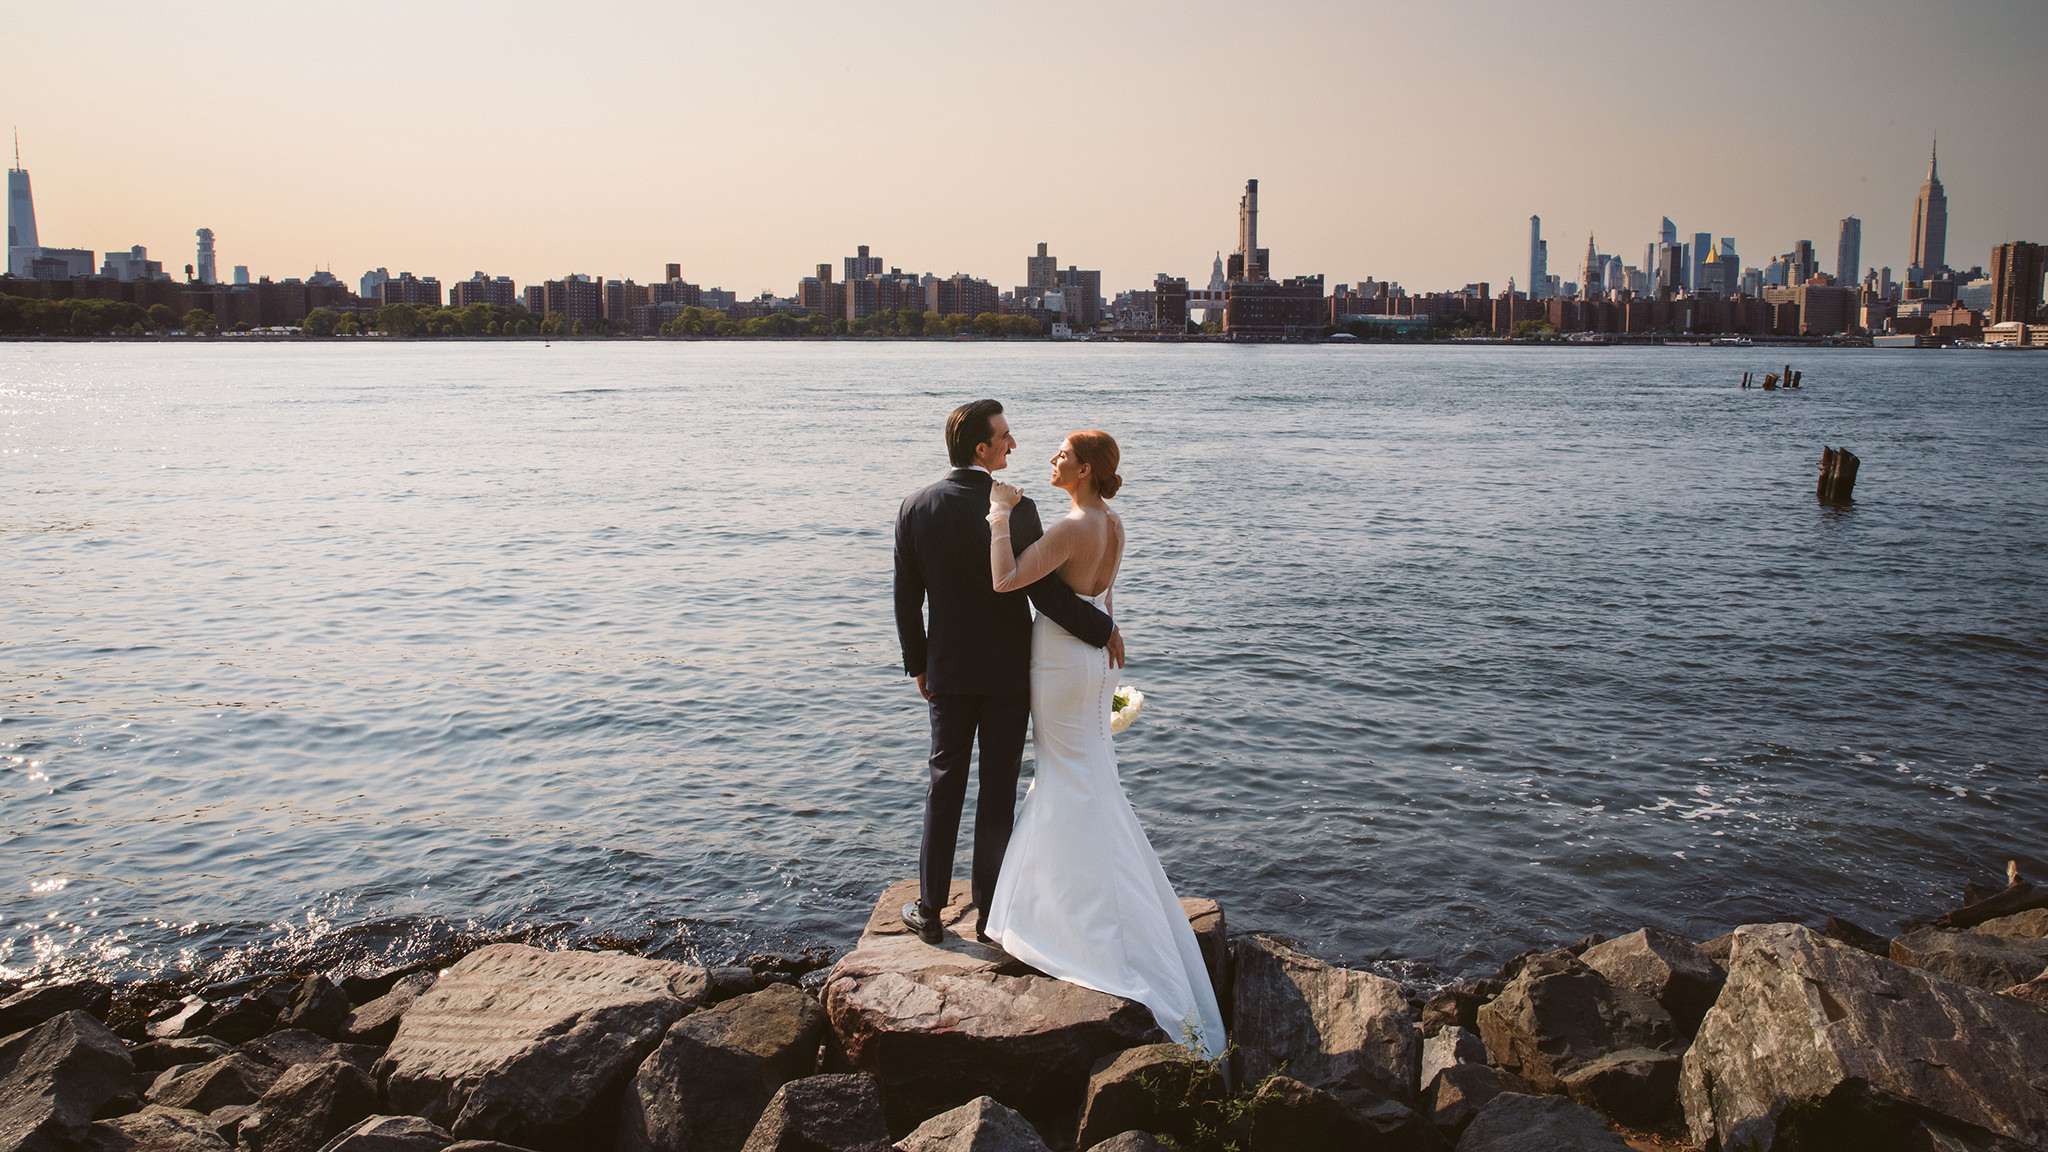 A wedding portrait in front of the New York City skyline